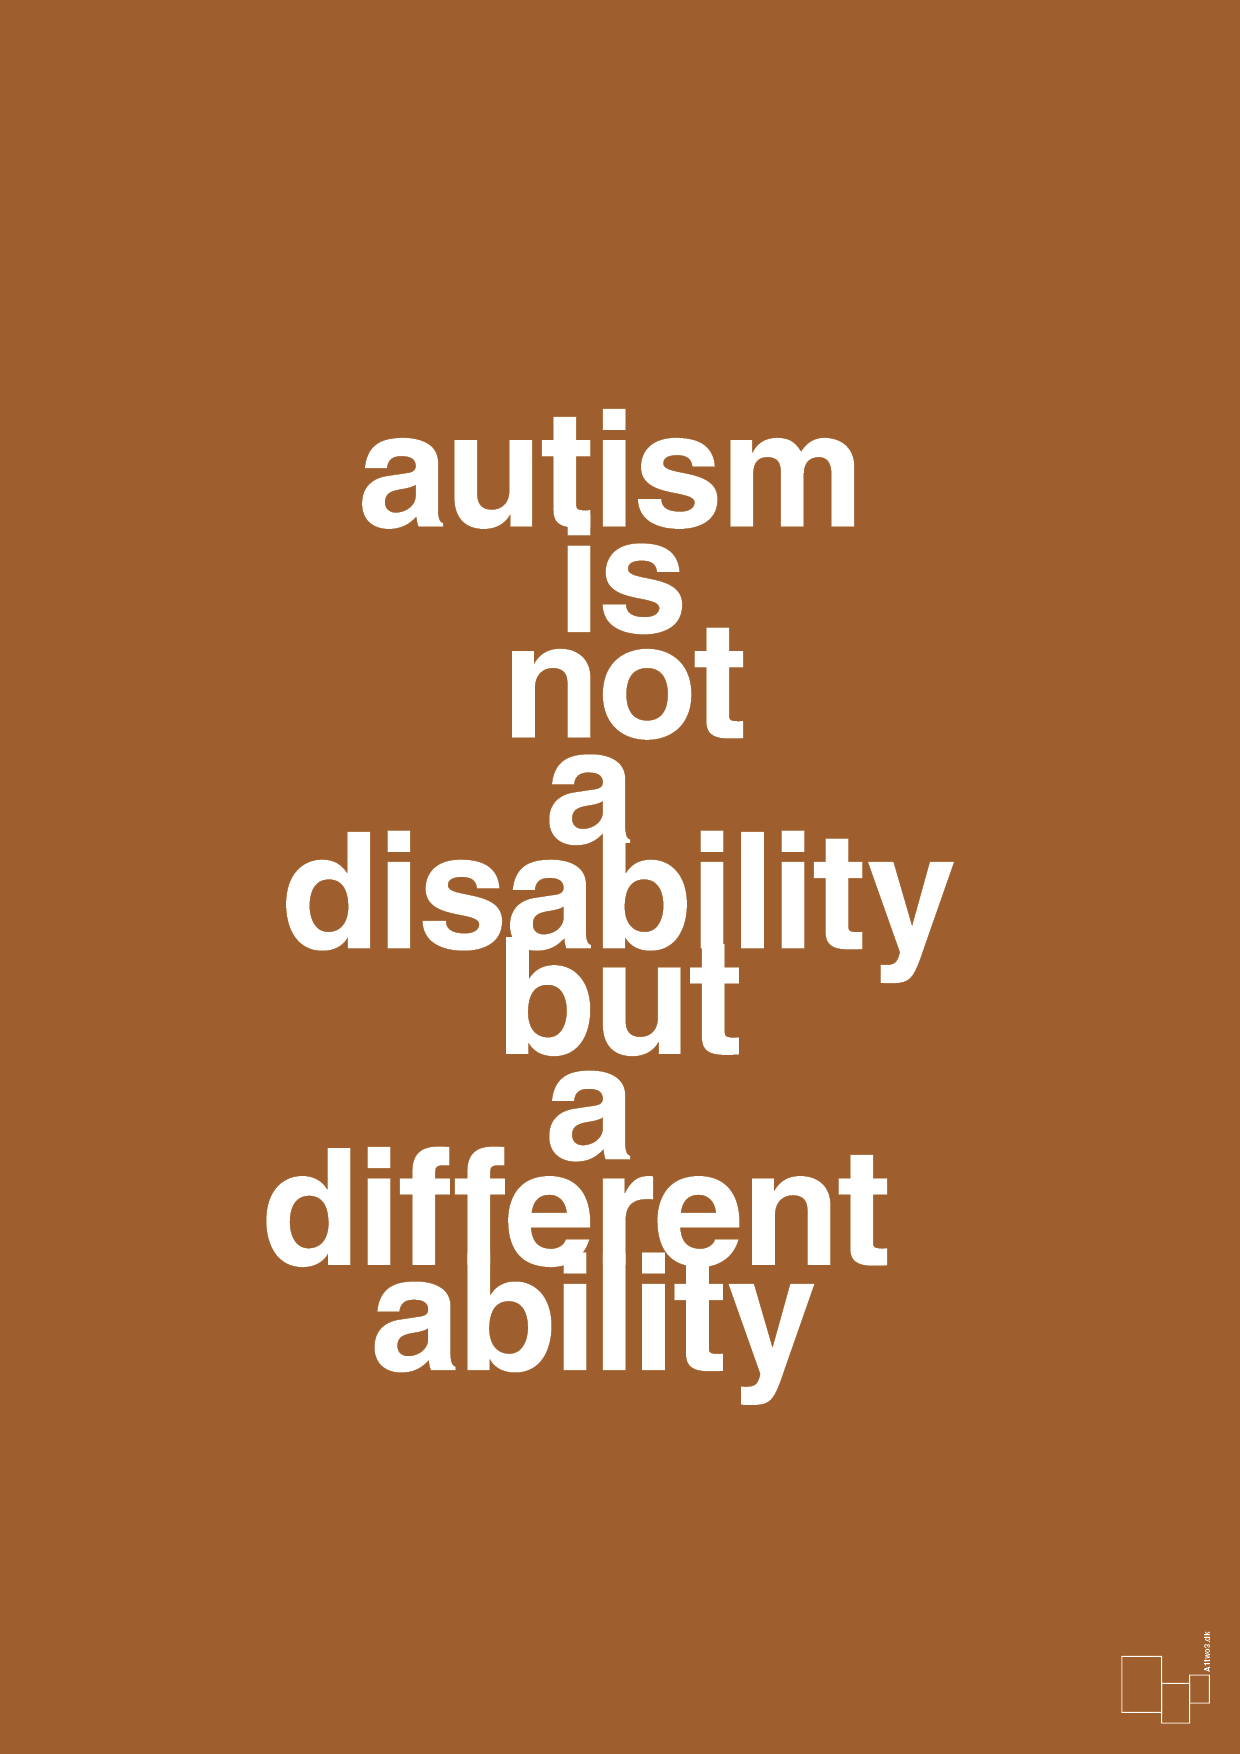 autism is not a disability but a different ability - Plakat med Samfund i Cognac